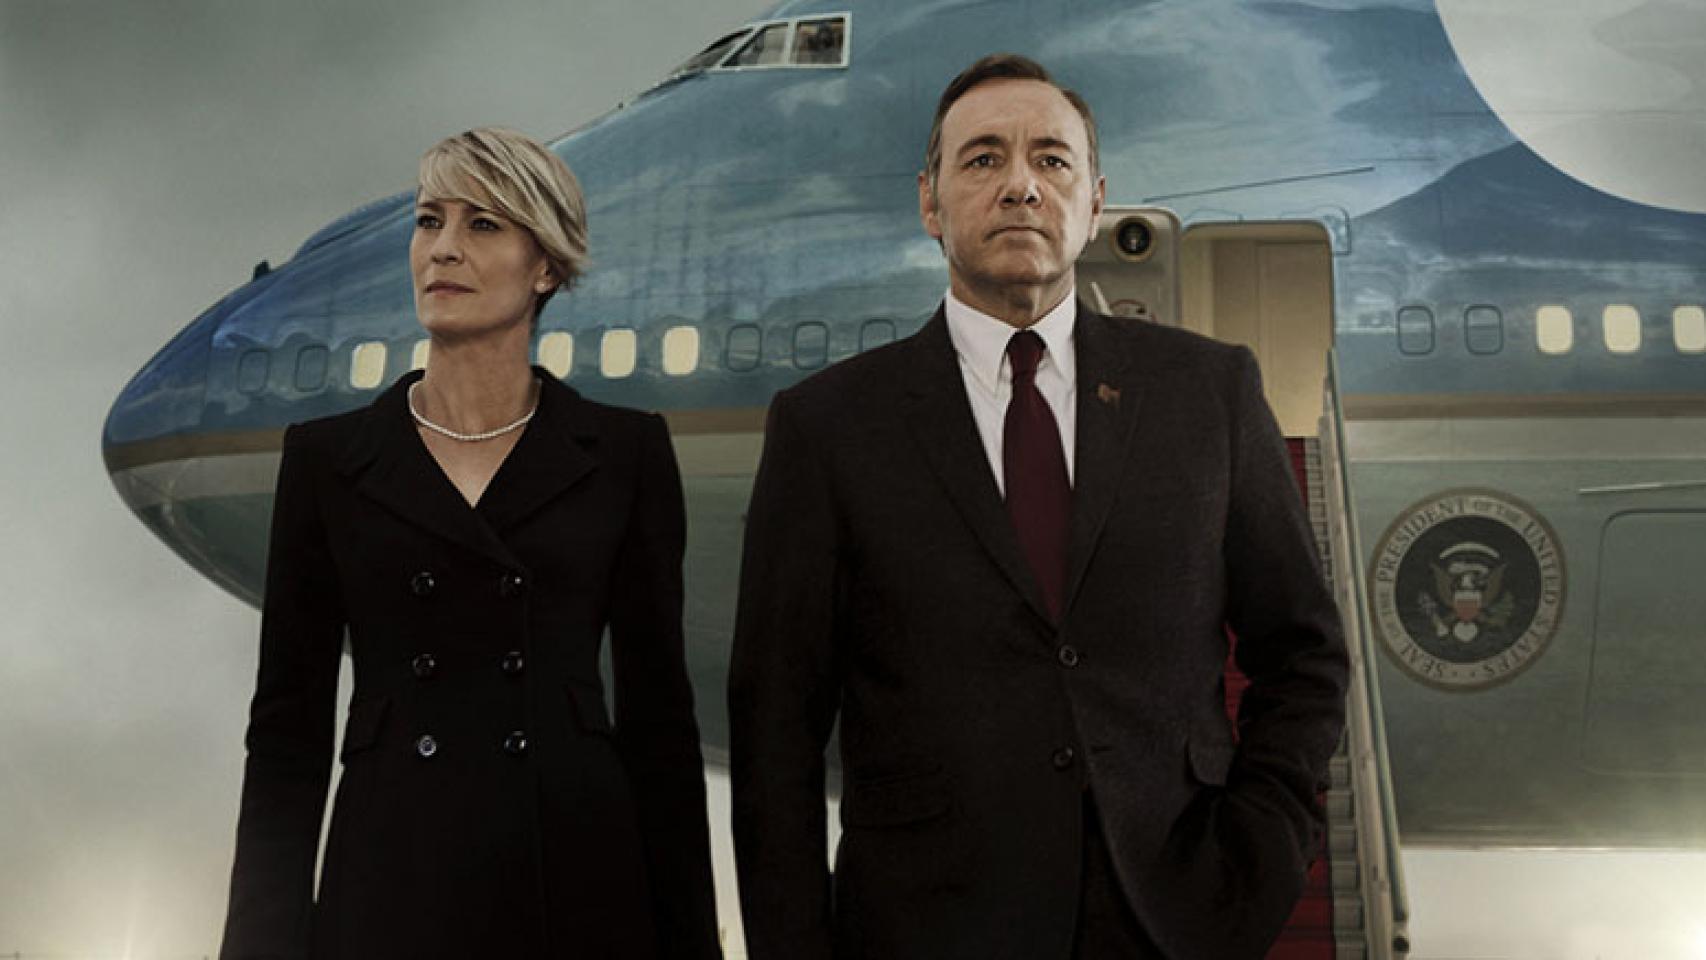 Robin Wright y Kevin Spacey en 'House of Cards'